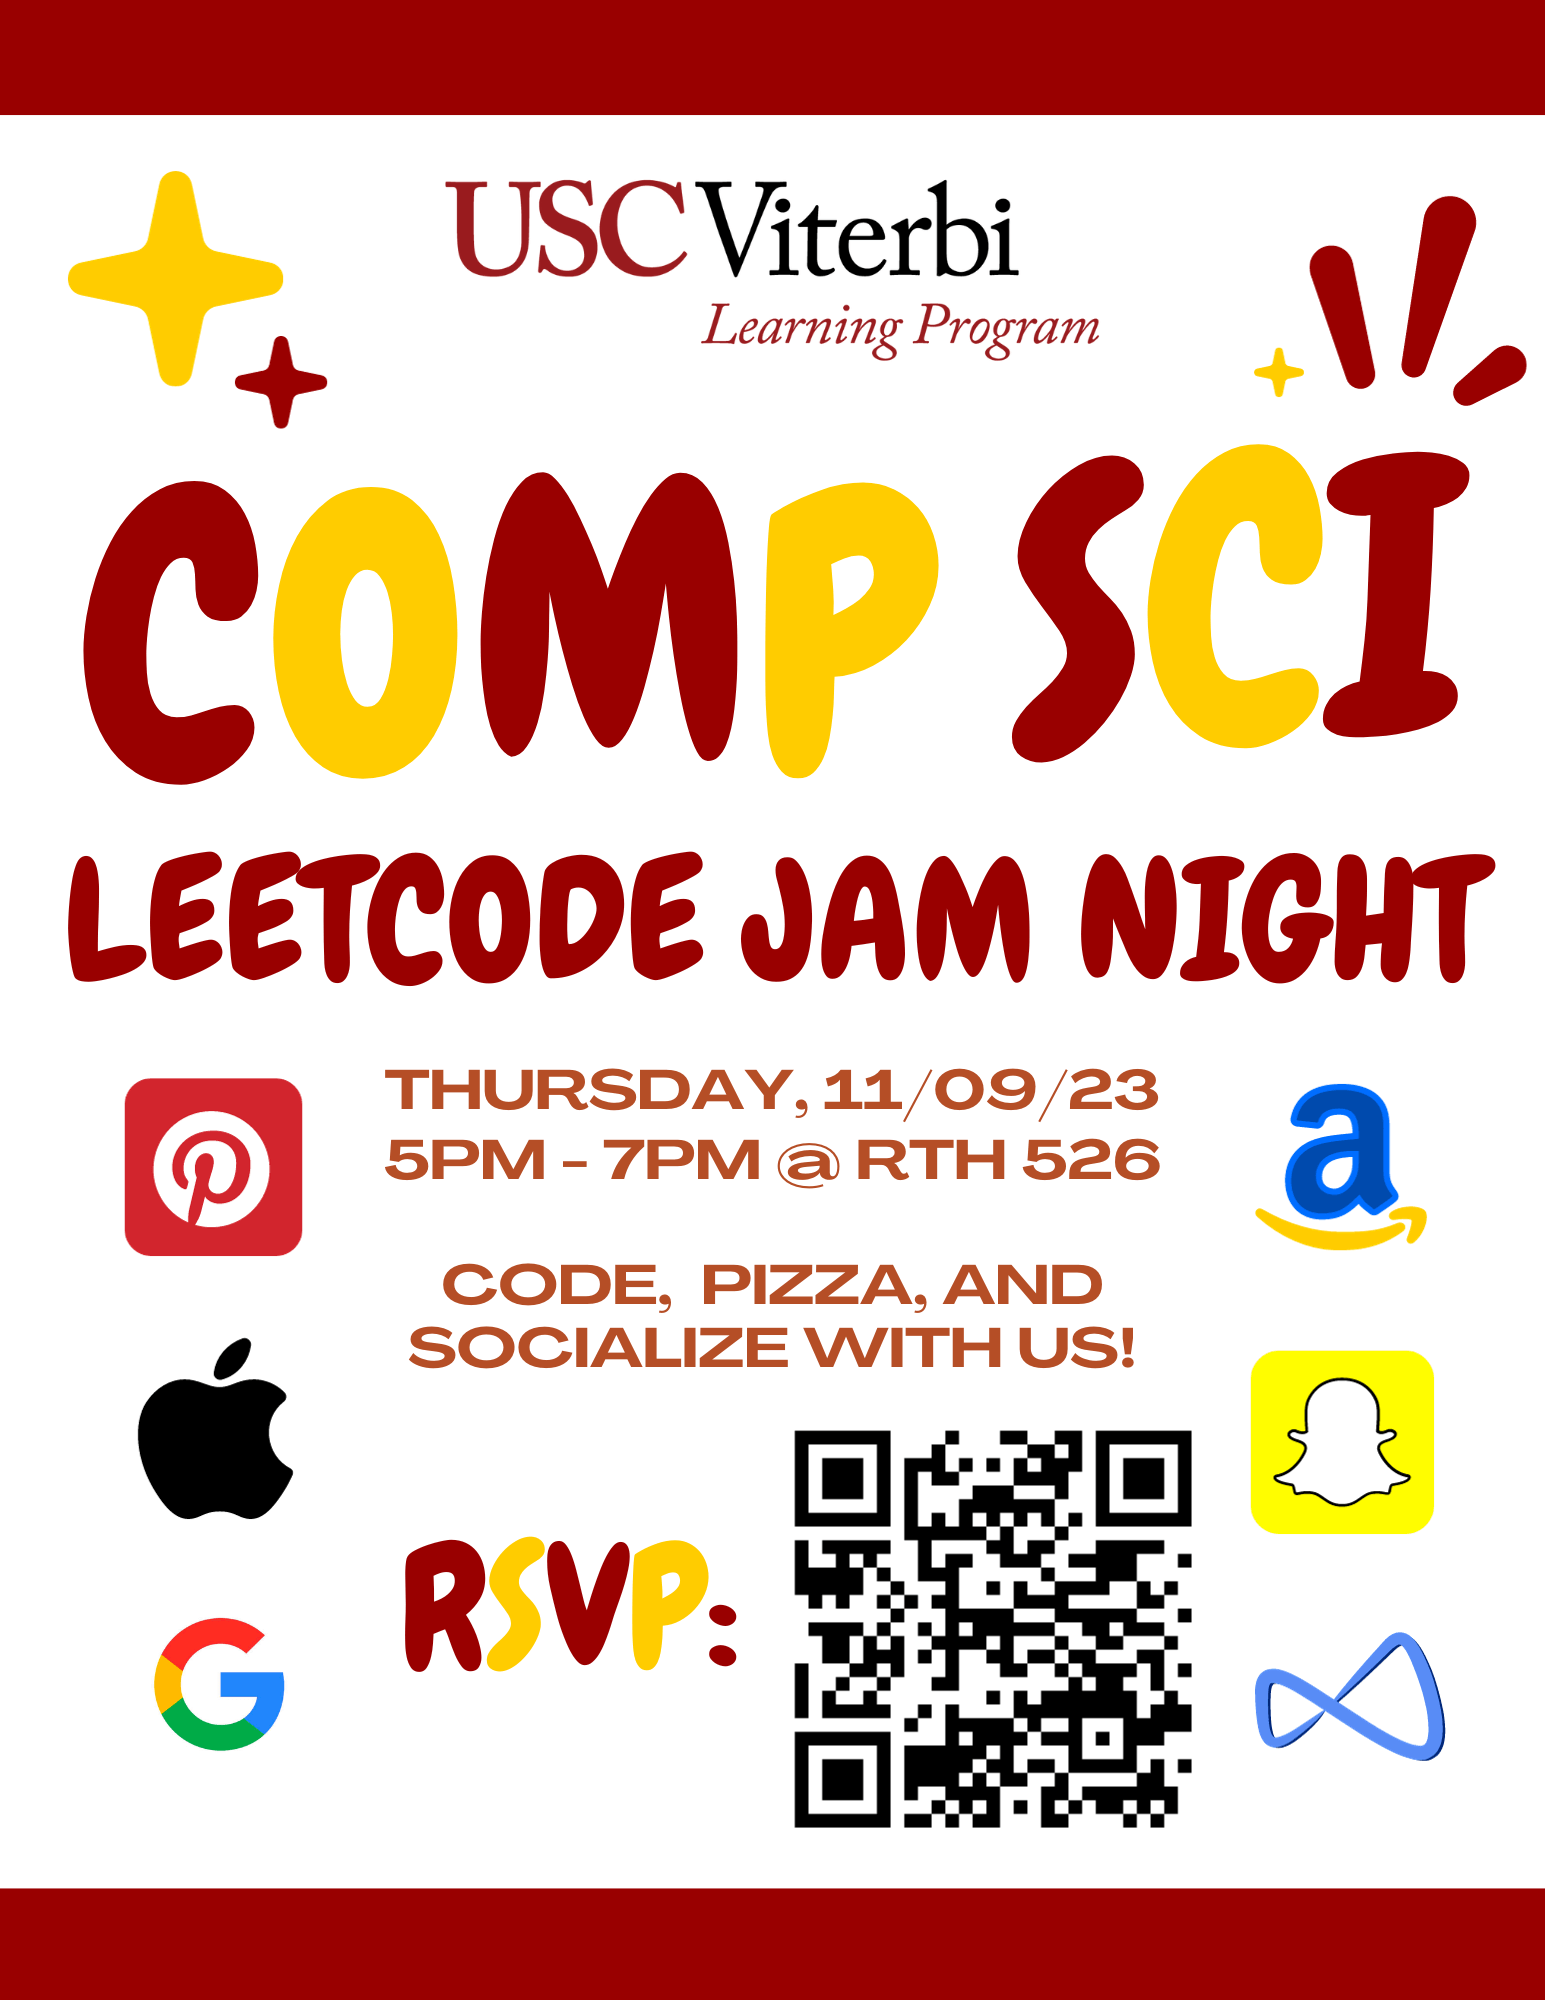 Featured image for “Leetcode Jam Night 11/9 5-7PM”